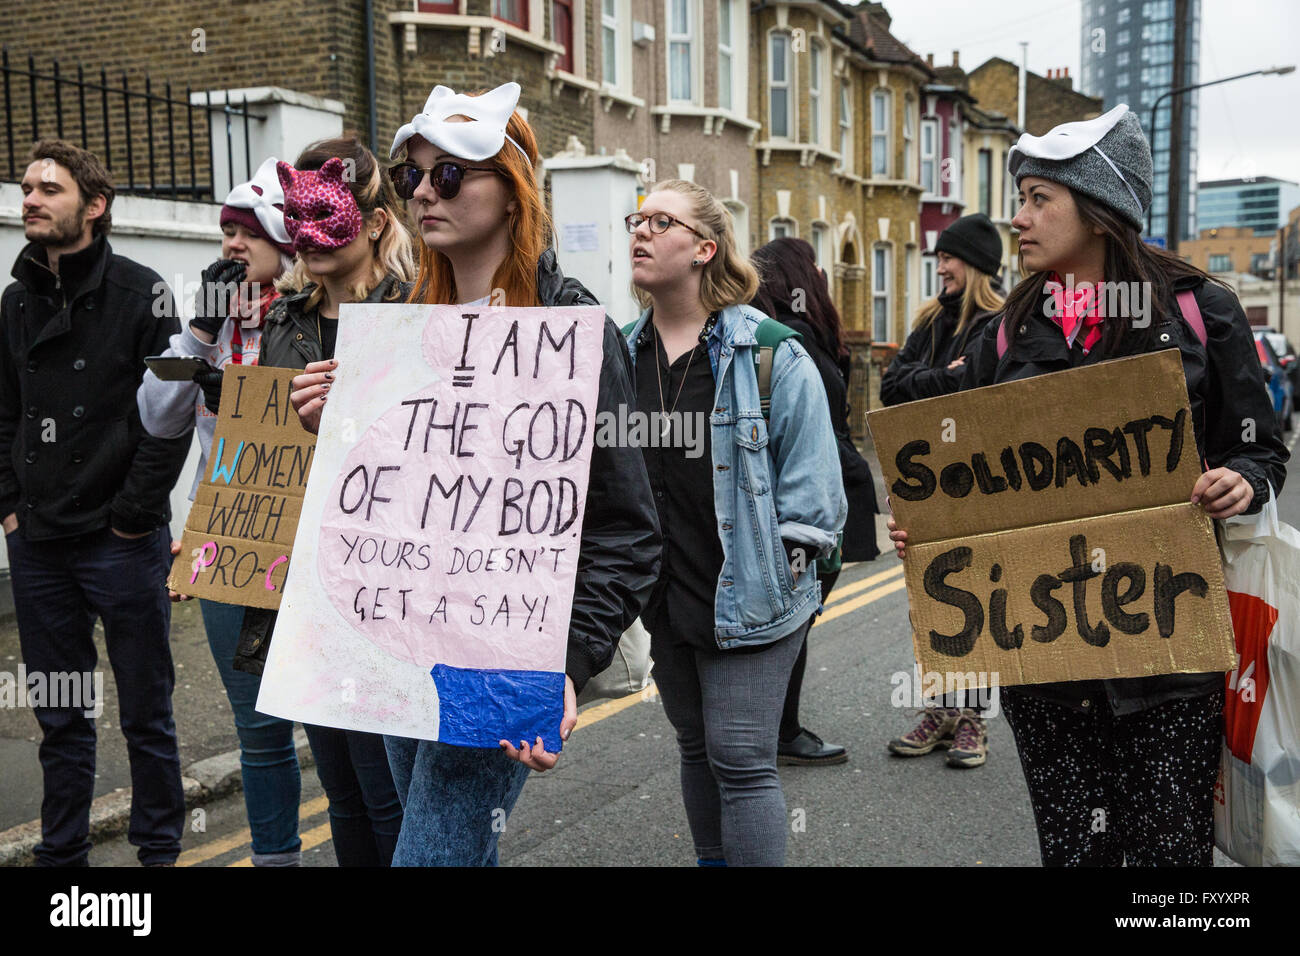 London, UK. 16th April, 2016. Feminist Fightback campaigners protest for ‘reproductive rights’ outside a Stratford church. Stock Photo